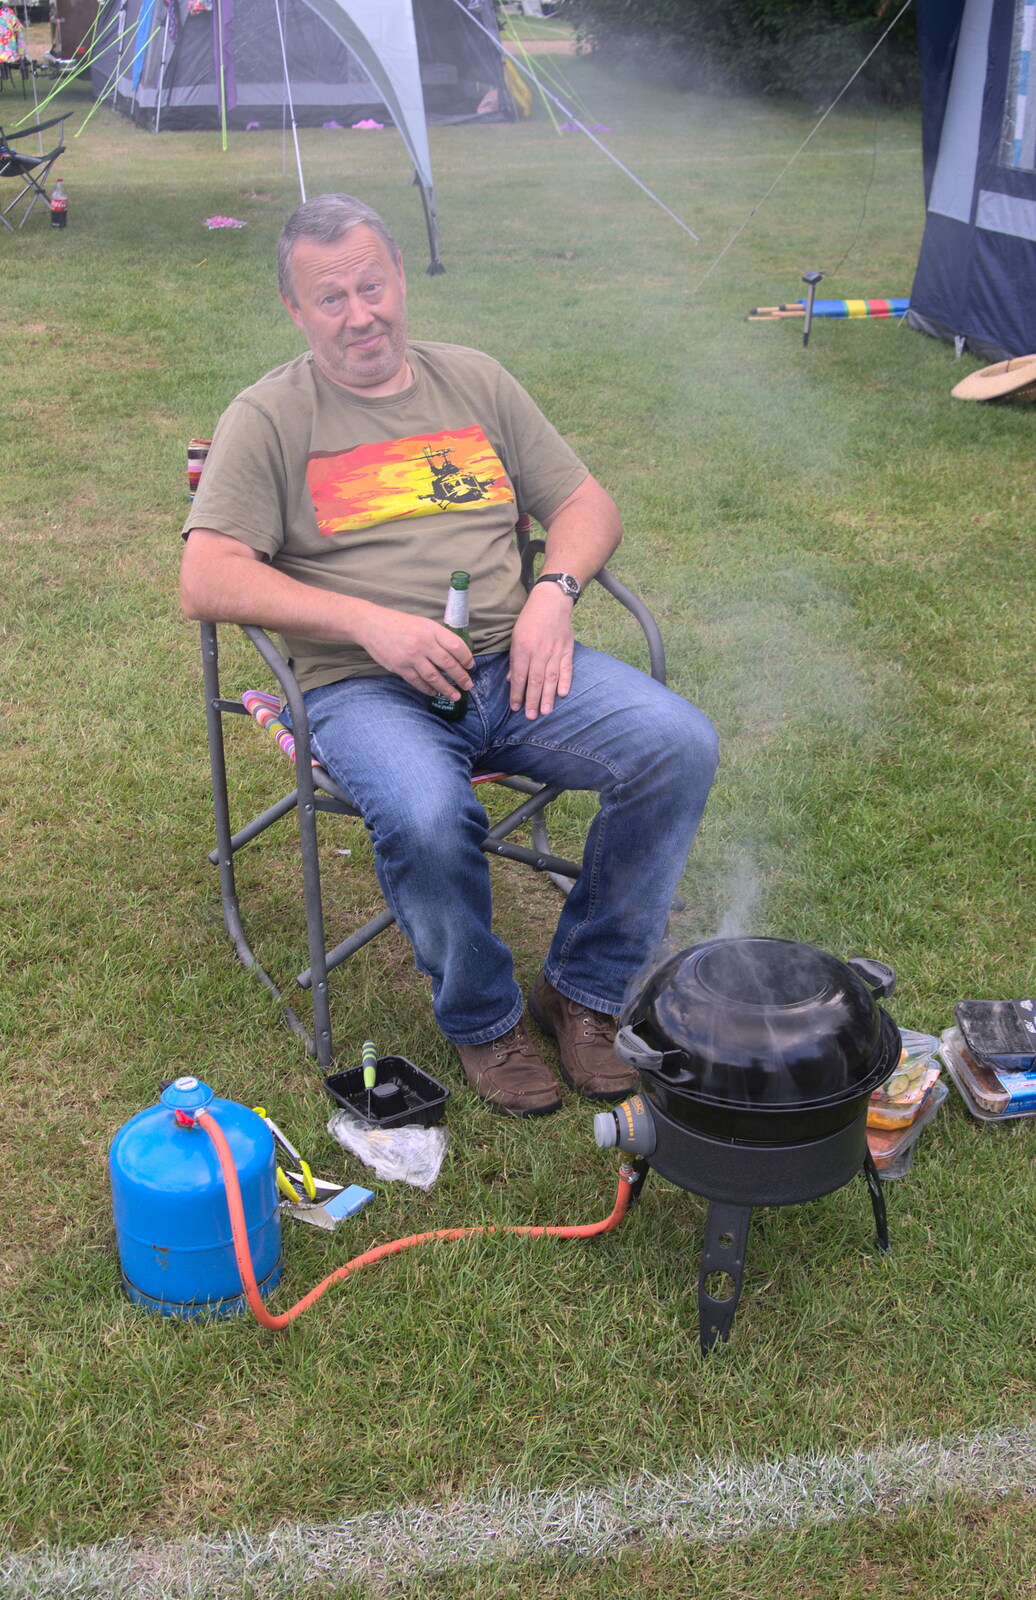 Chris looks happy with his lot from Camping at Dower House, West Harling, Norfolk - 1st July 2017